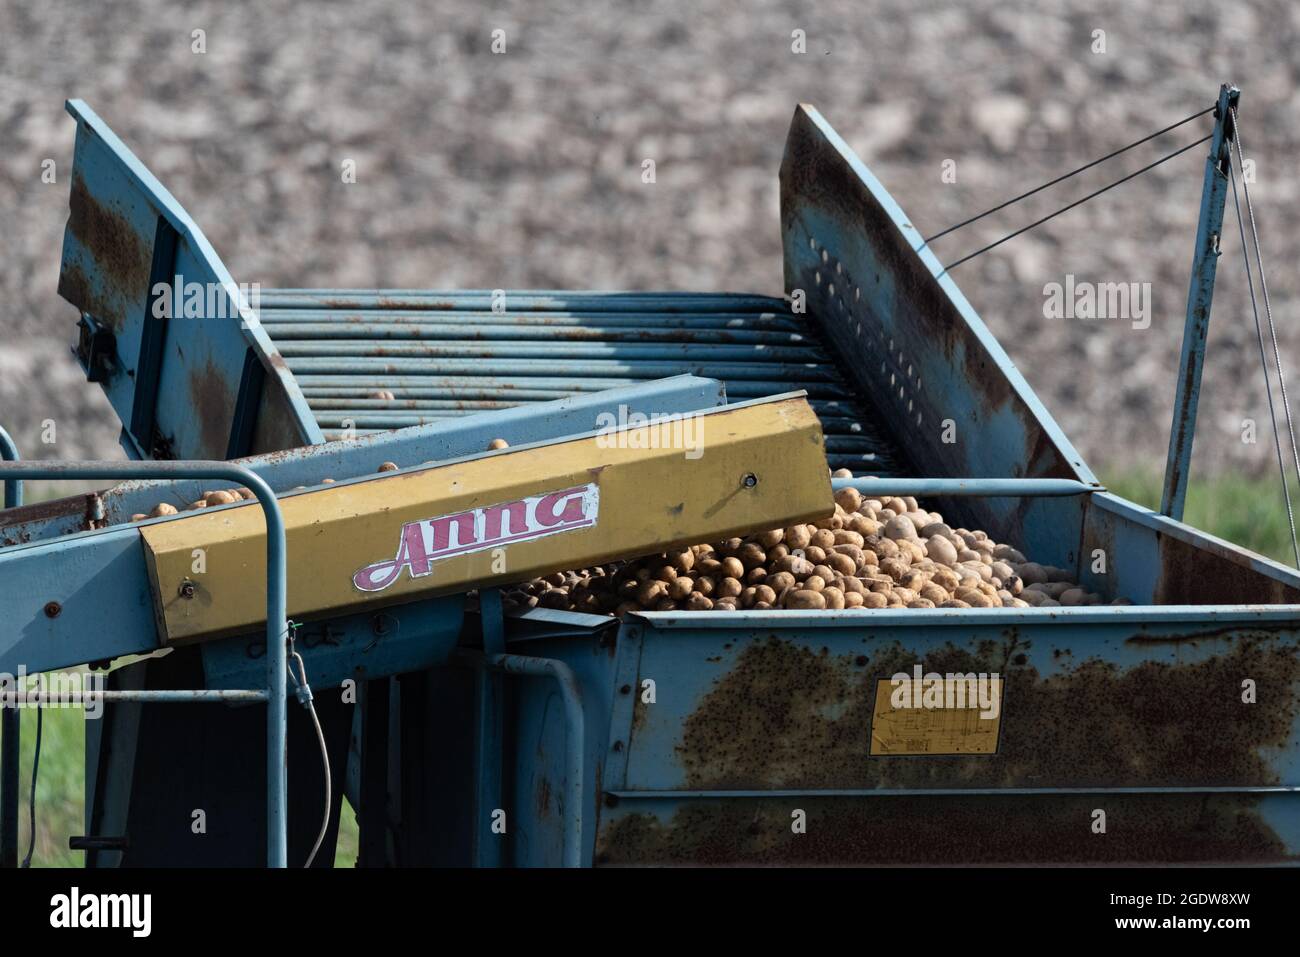 https://c8.alamy.com/comp/2GDW8XW/serock-poland-september-14-2020-harvesting-potatoes-with-an-old-harvester-agricultural-machinery-in-the-field-2GDW8XW.jpg